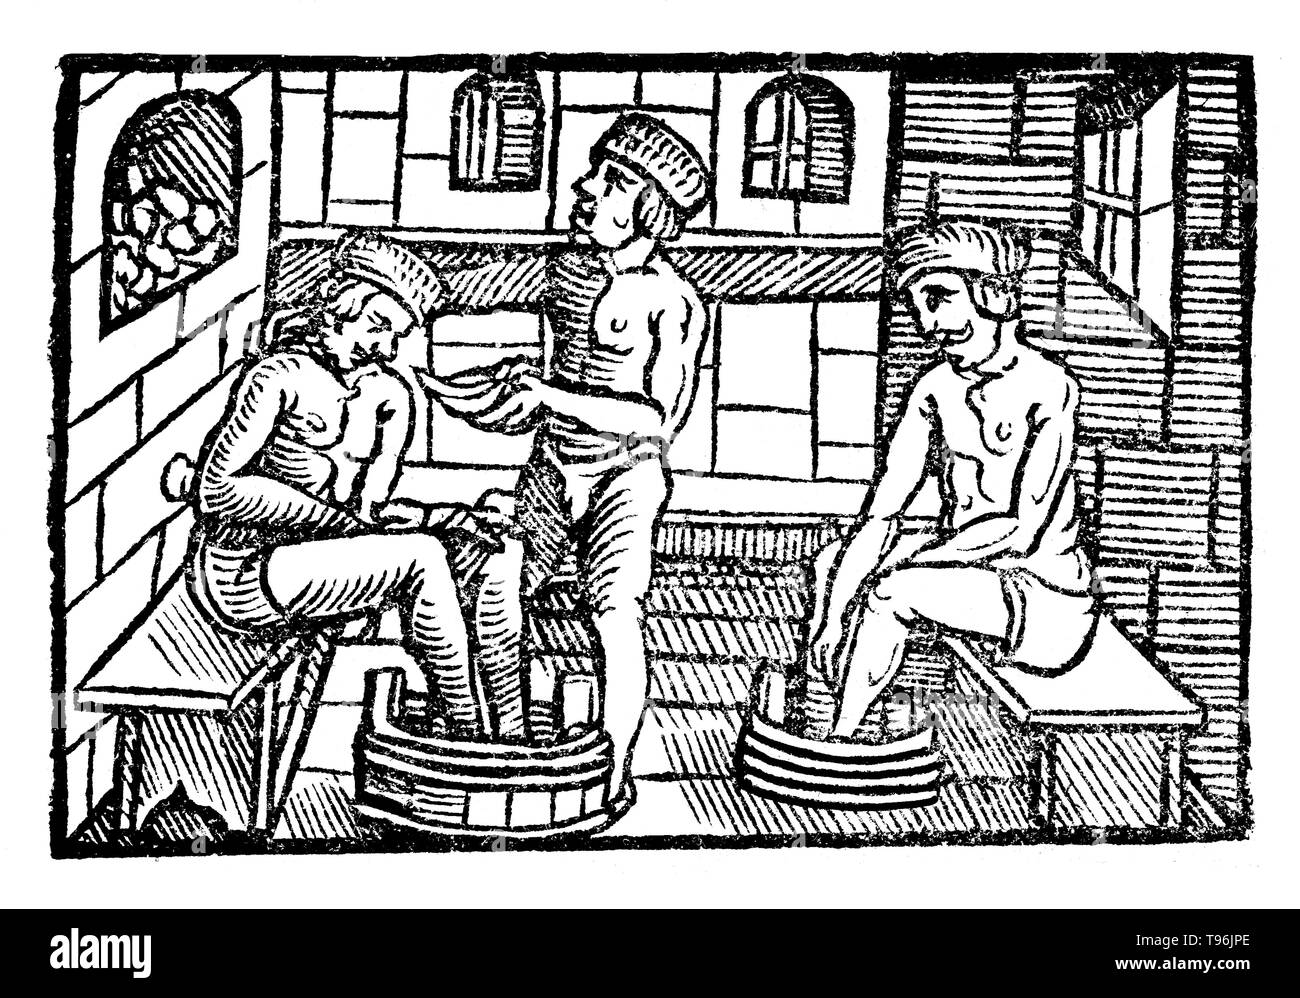 Woodcut illustration from Der gantzen Artzenei, 1542. Johann Dryander (Eichmann) (June 27, 1500 - December 20, 1560) was a German anatomist, astronomer and physician. In 1535, he was appointed professor of medicine at the University of Marburg. Dryander was one of the first textbook authors to illustrate with woodcuts and the first to illustrate a Galenic dissection of the human brain. An expanded edition of this early book, the Anatomiae pars prior, was published in 1537. Stock Photo